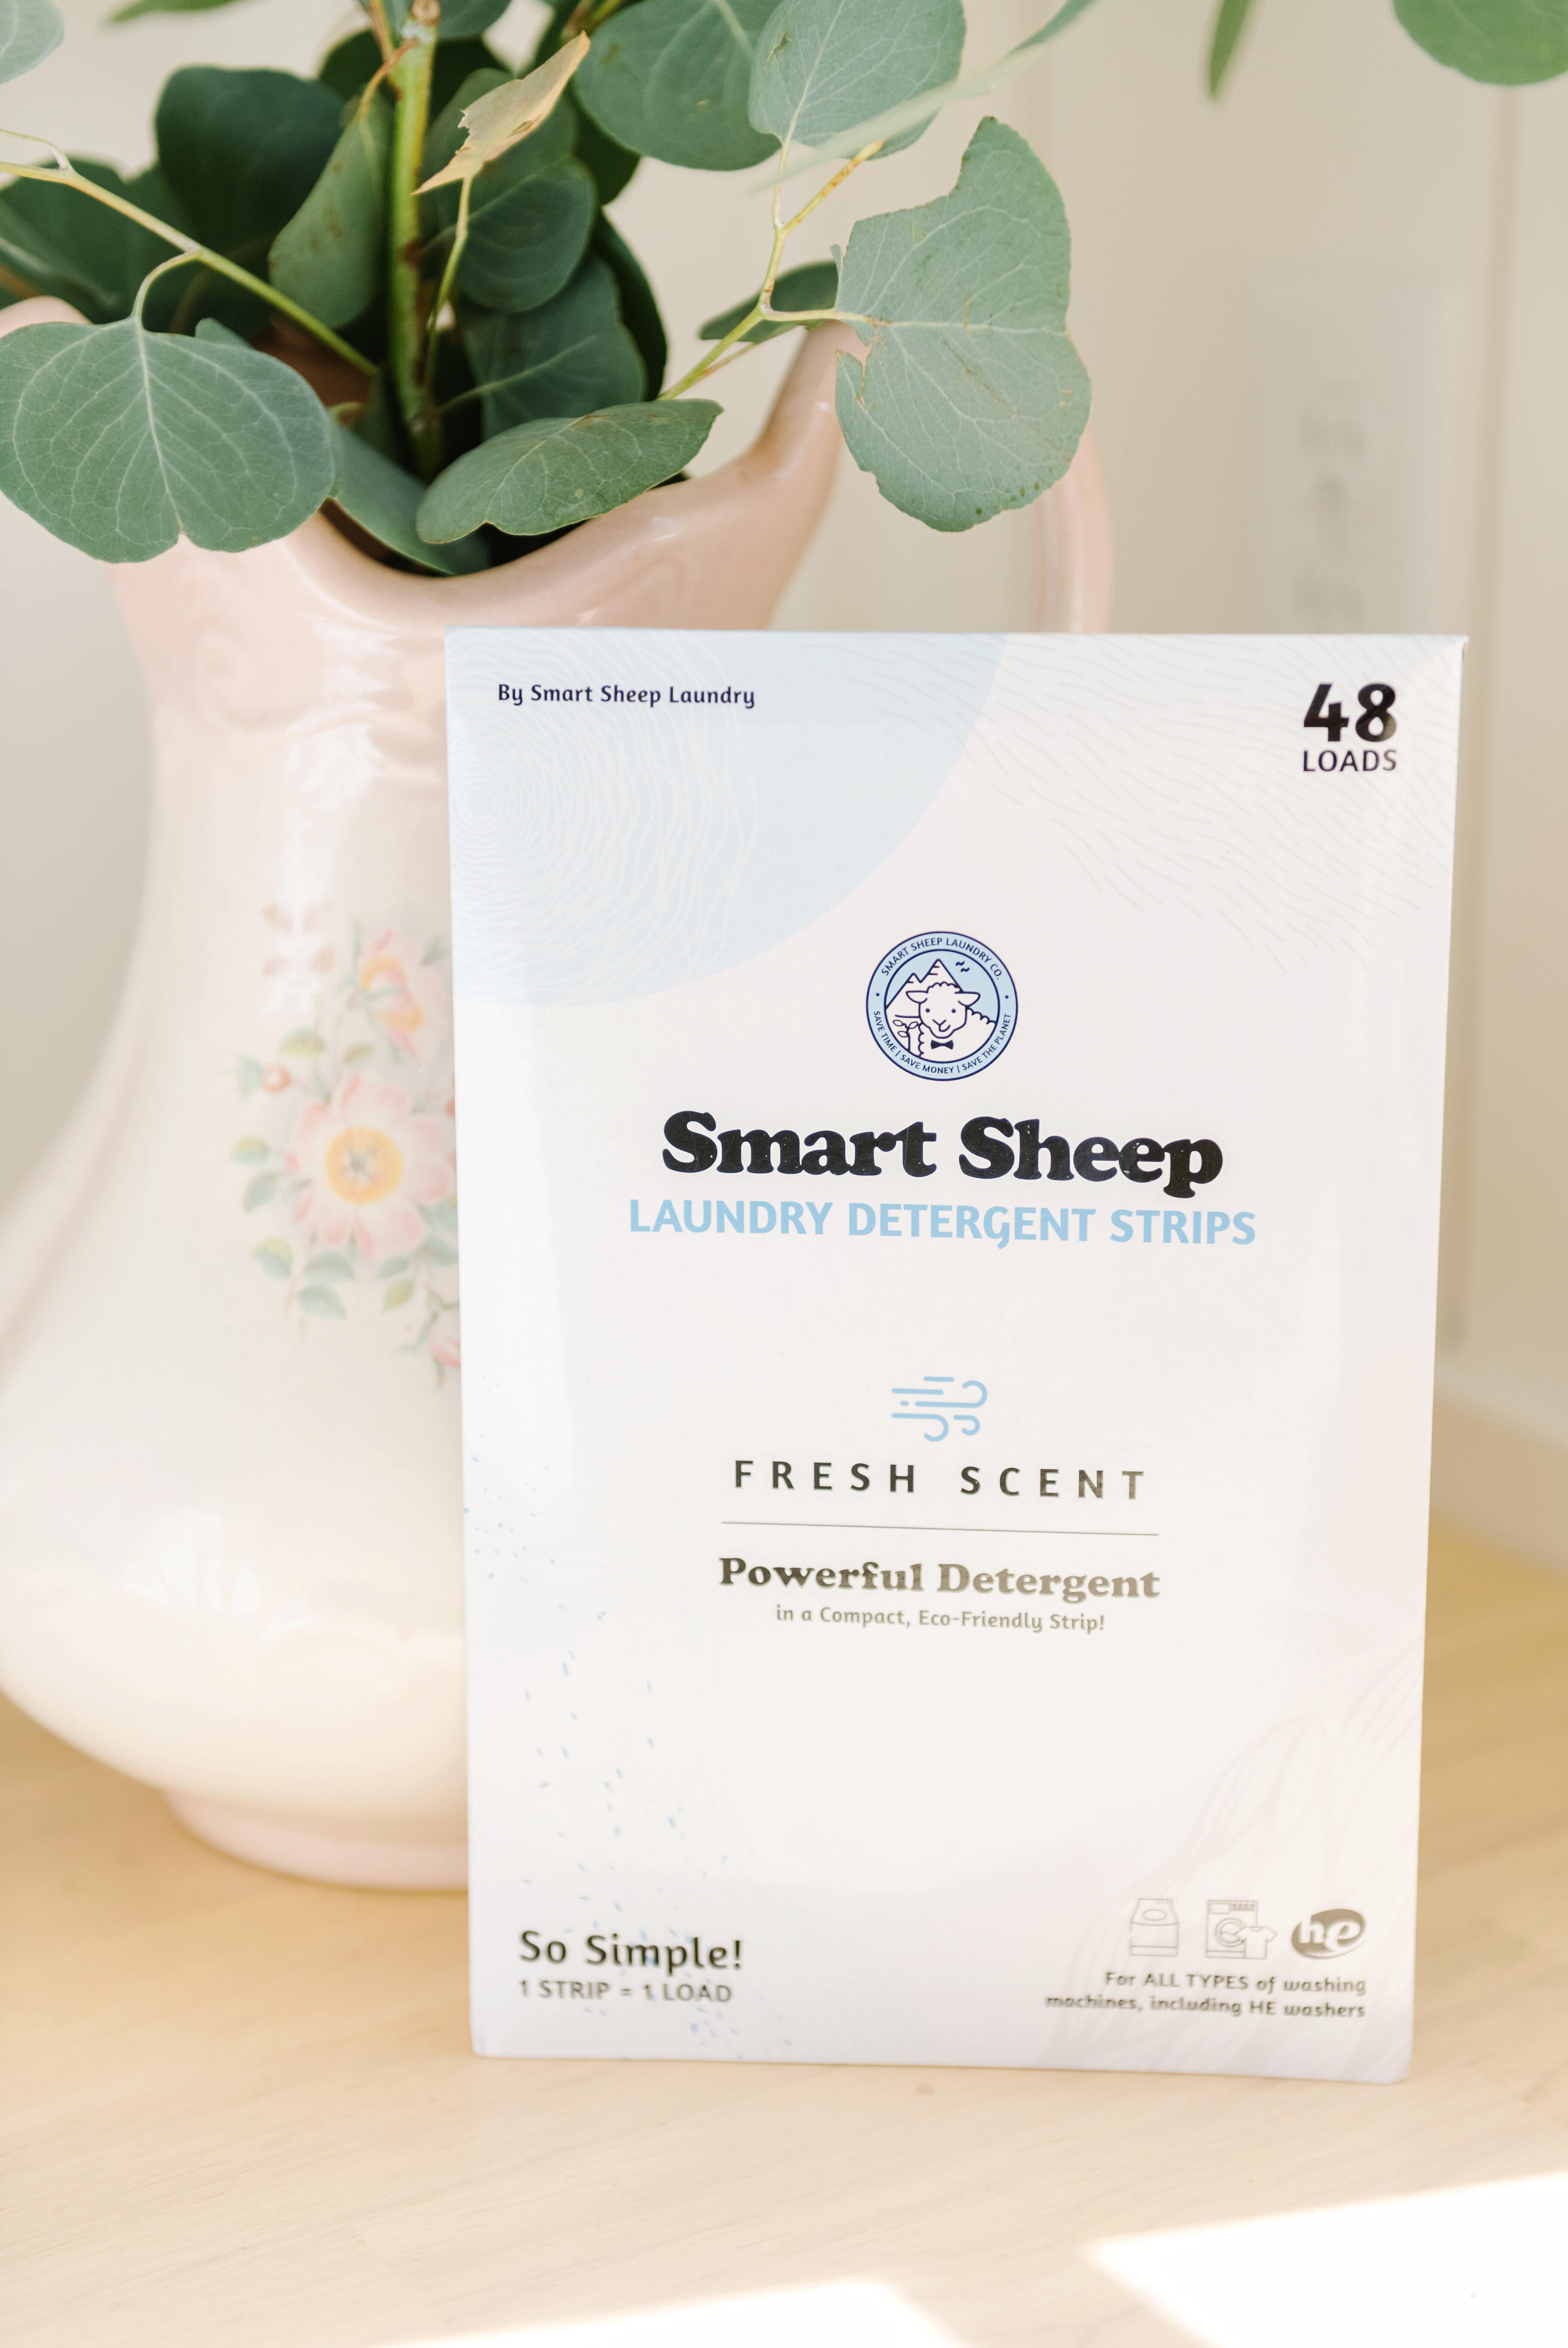 Sheets laundry detergent sheets help you save money